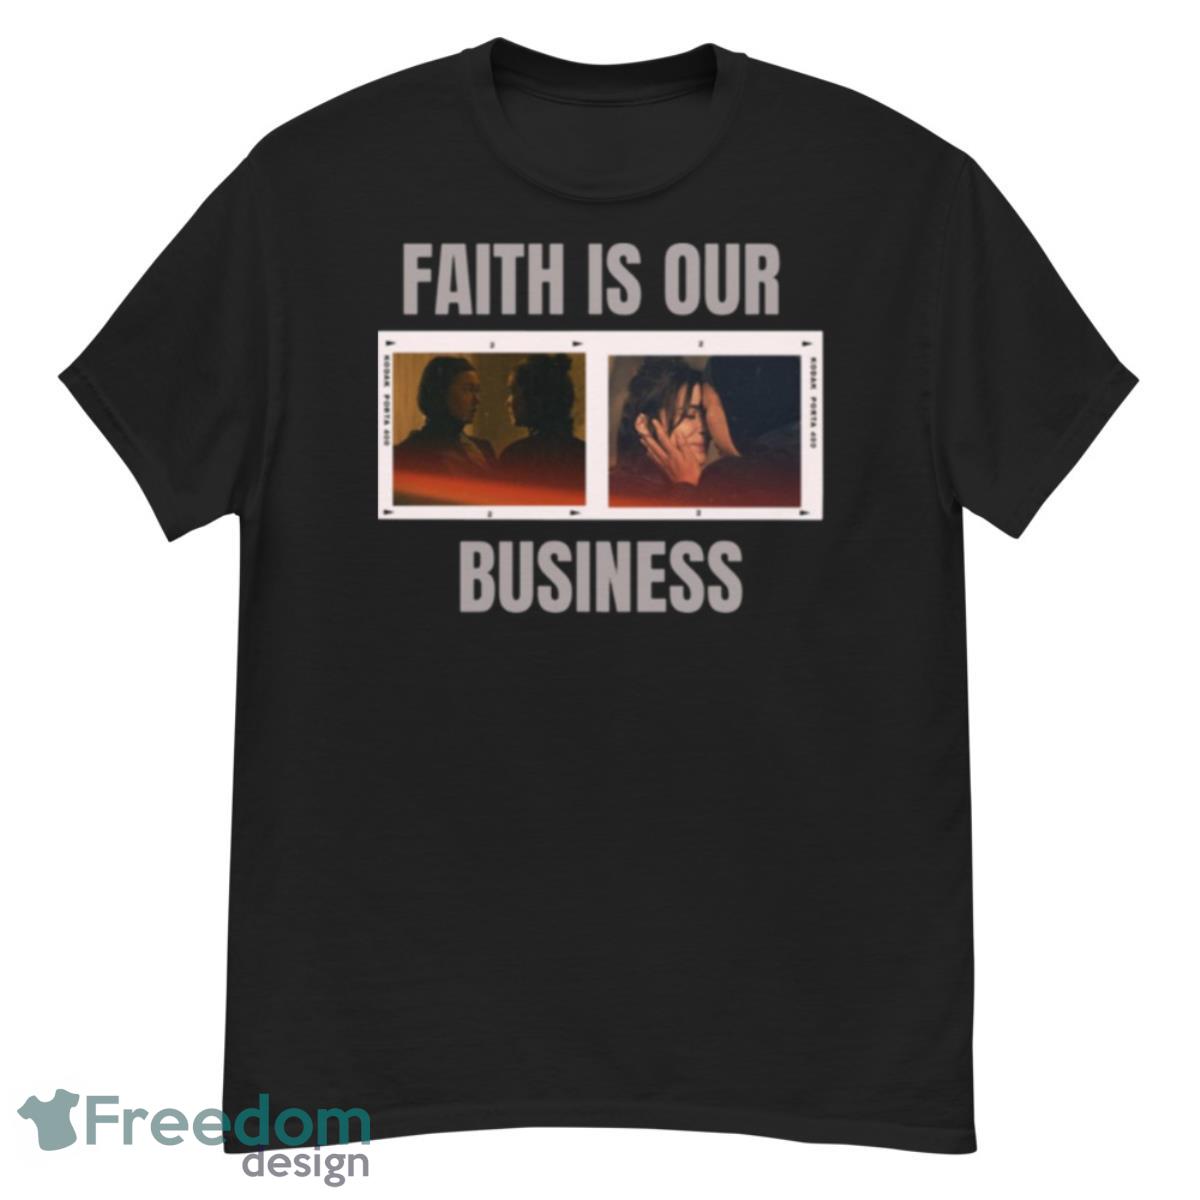 Beatrice And Ava Kristina Tonteri Young Warrior Nun Faith Is Our Business shirt - G500 Men’s Classic T-Shirt